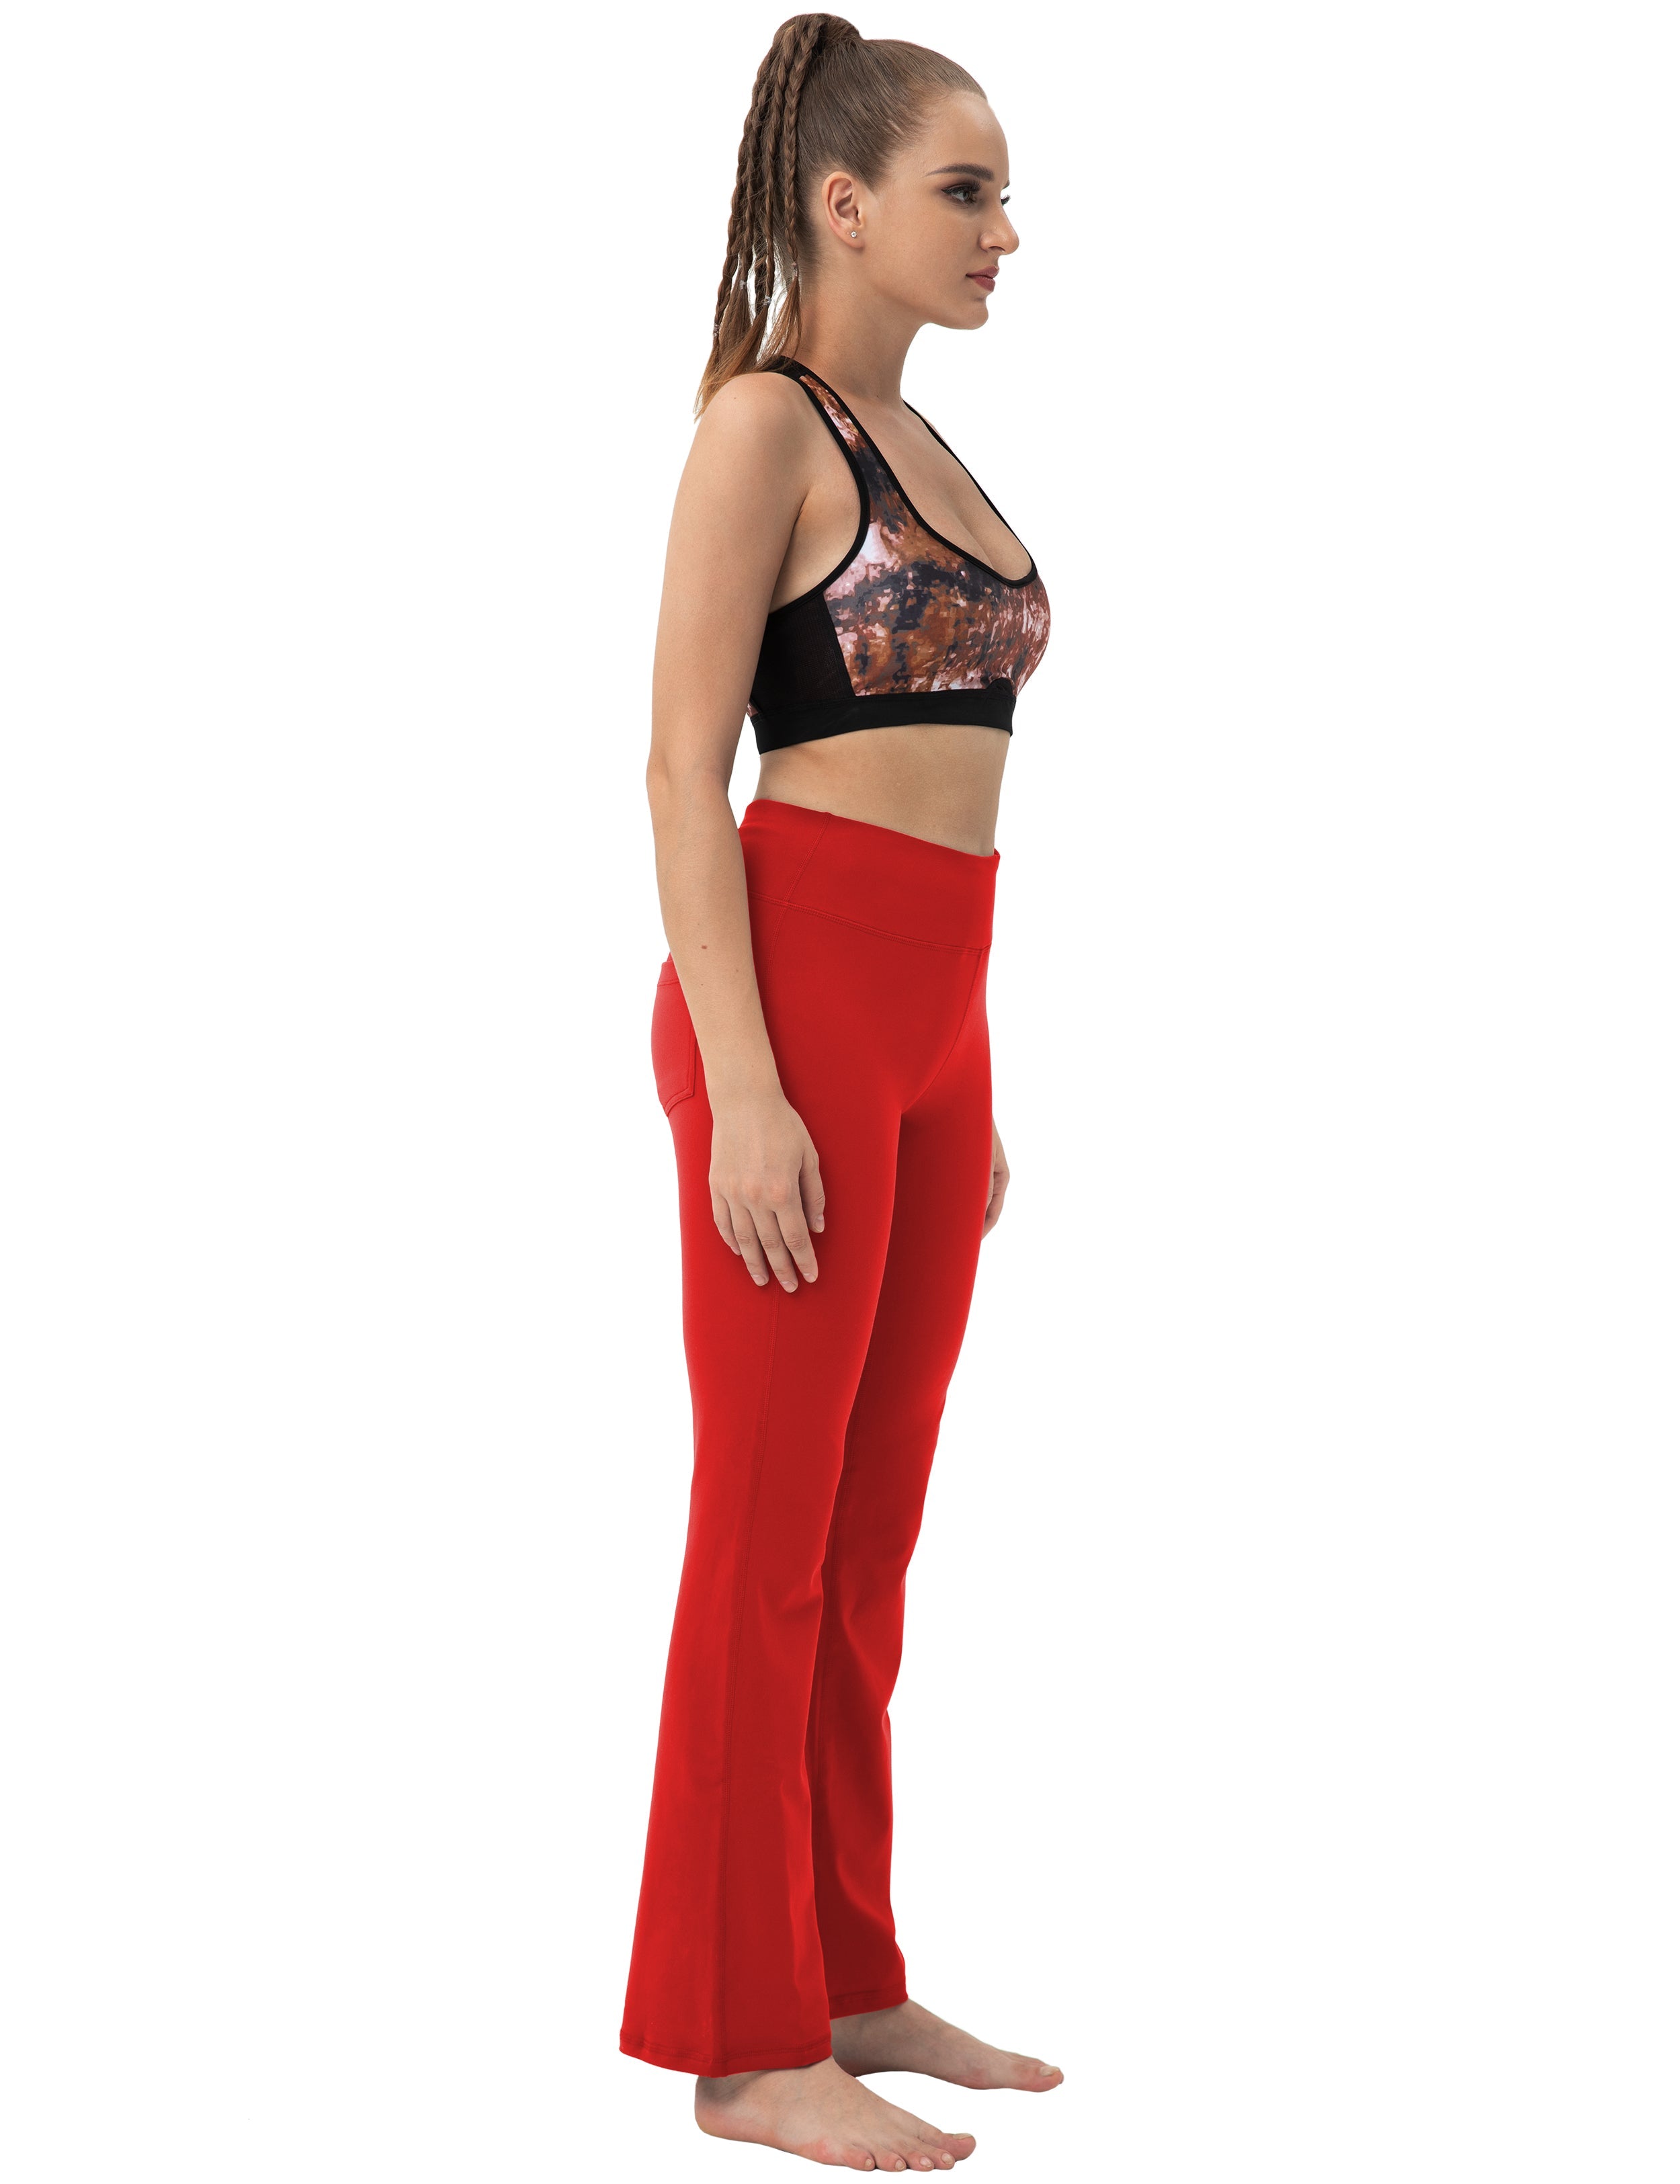 Back Pockets Bootcut Leggings scarlet 87%Nylon/13%Spandex Fabric doesn't attract lint easily 4-way stretch No see-through Moisture-wicking Inner pocket Four lengths